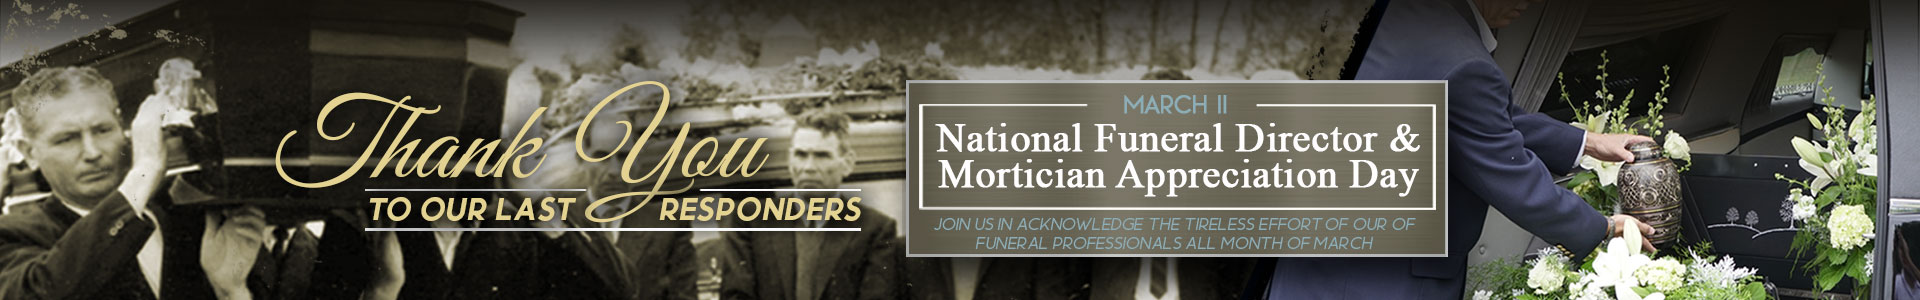 National-Funeral-Directors-Day-3